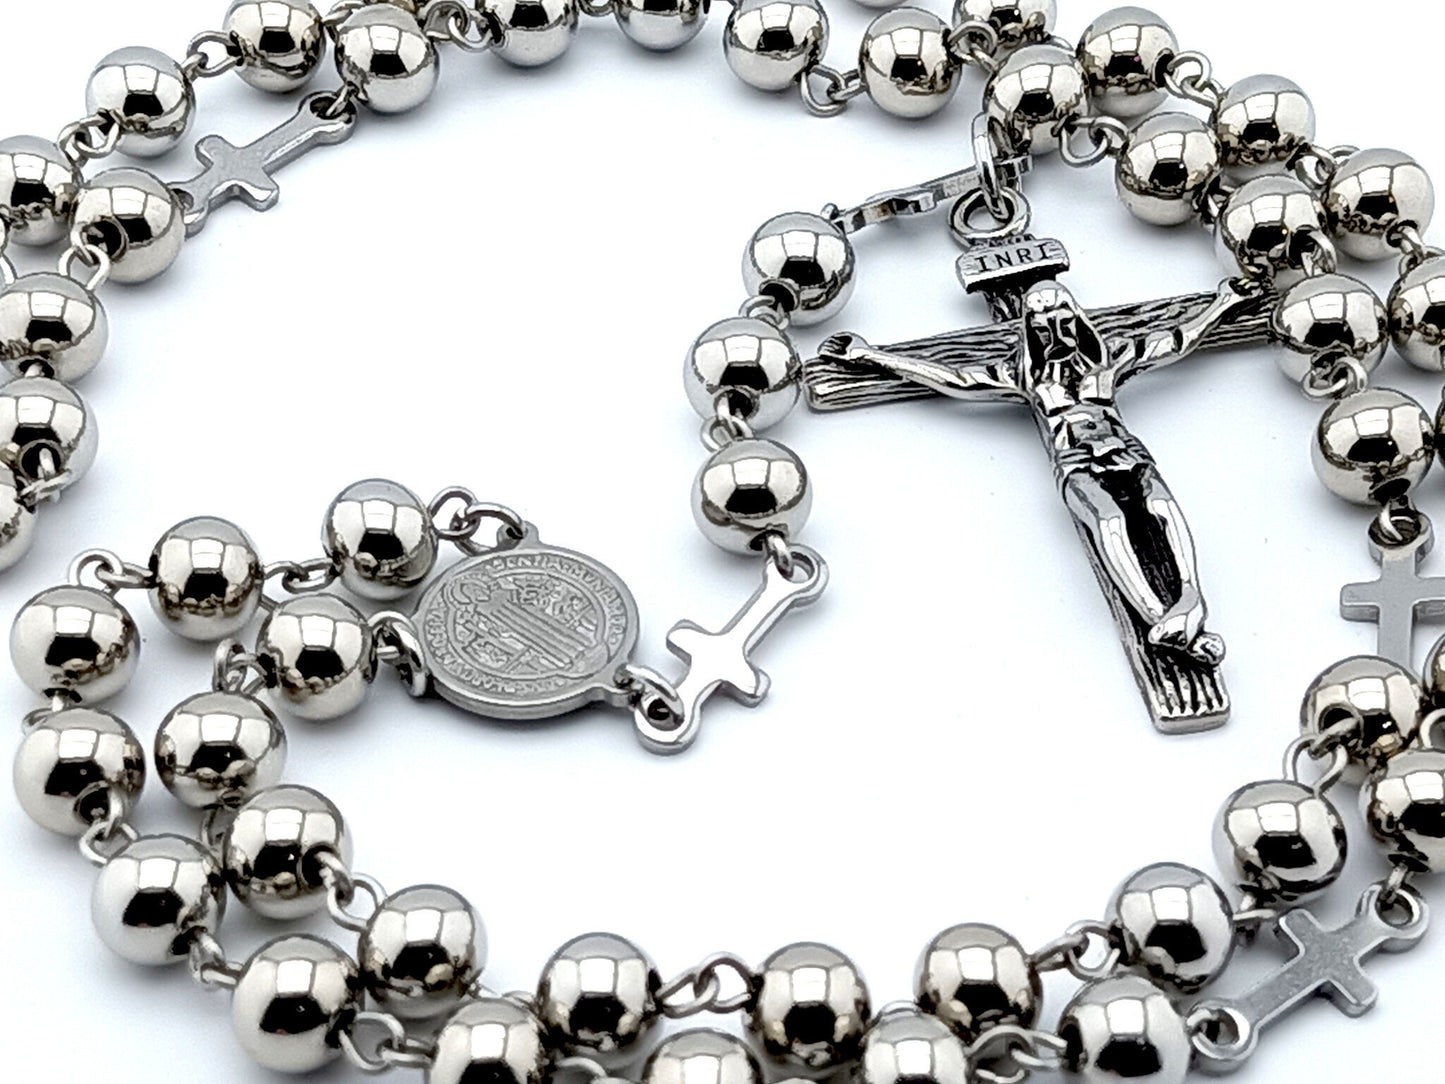 Saint Benedict unique rosary beads with stainless steel beads , crucifix, clasp and medals.